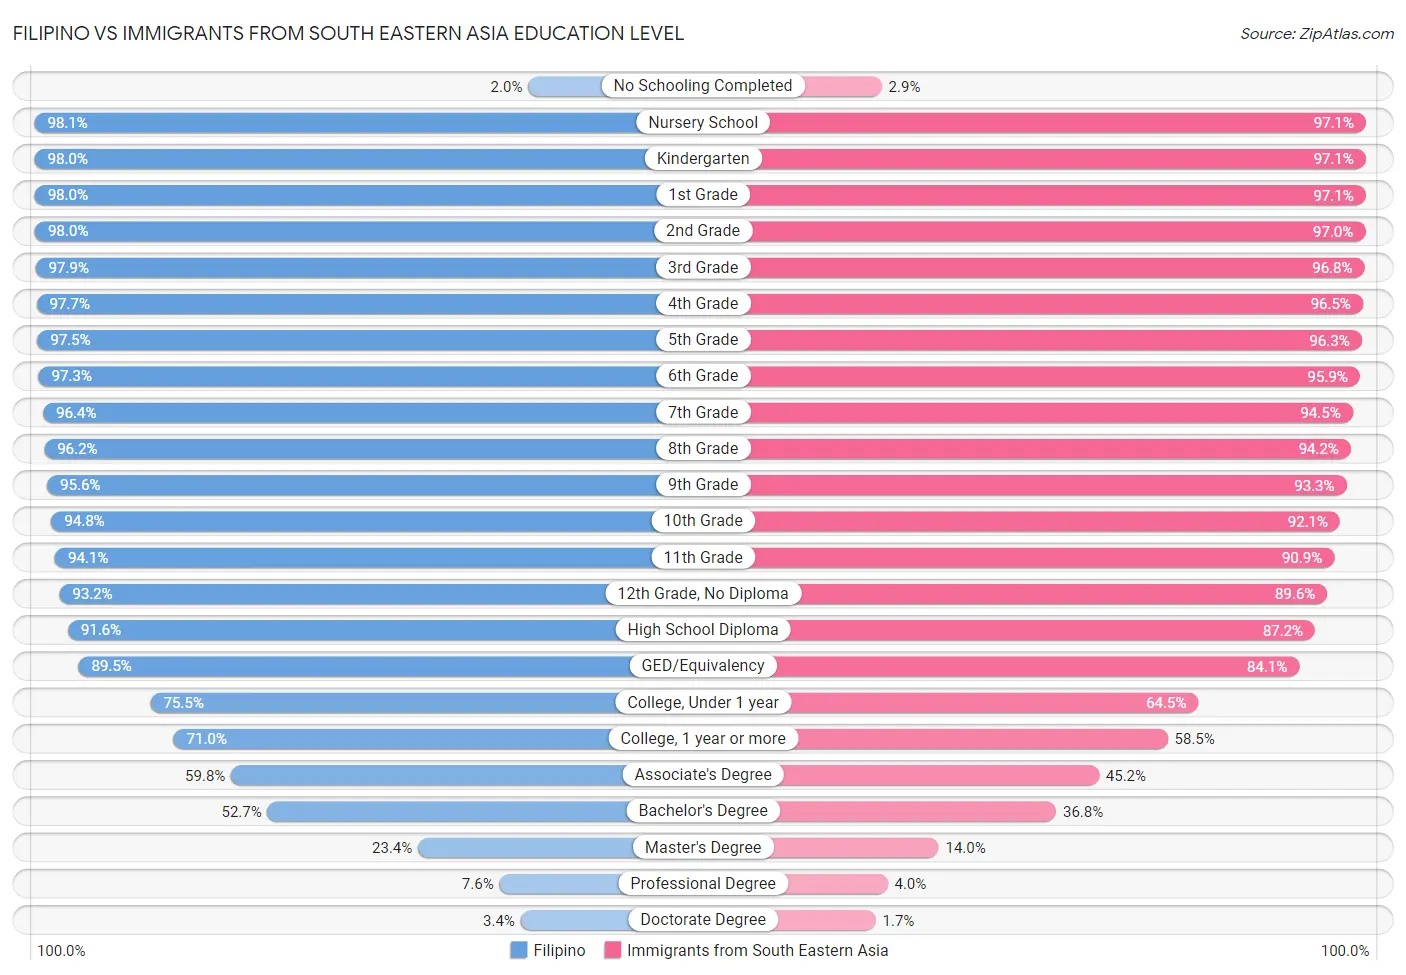 Filipino vs Immigrants from South Eastern Asia Education Level